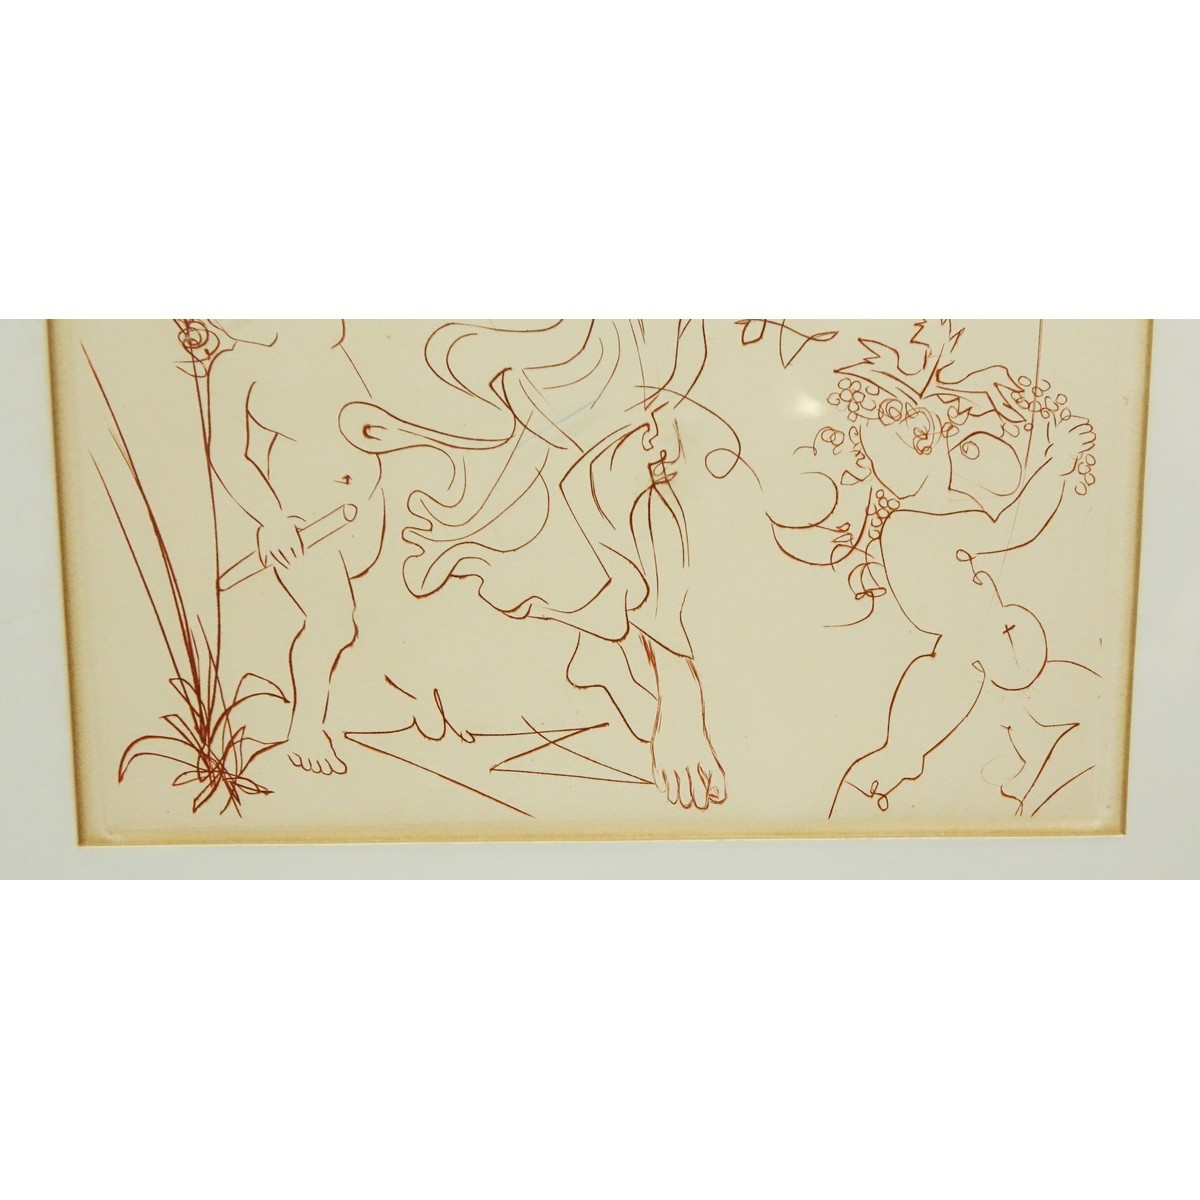 Salvador Dali, Spanish  (1904 - 1989) Original Color Engraving "Autumn" Signed in the Plate. Toning to paper overall good condition.